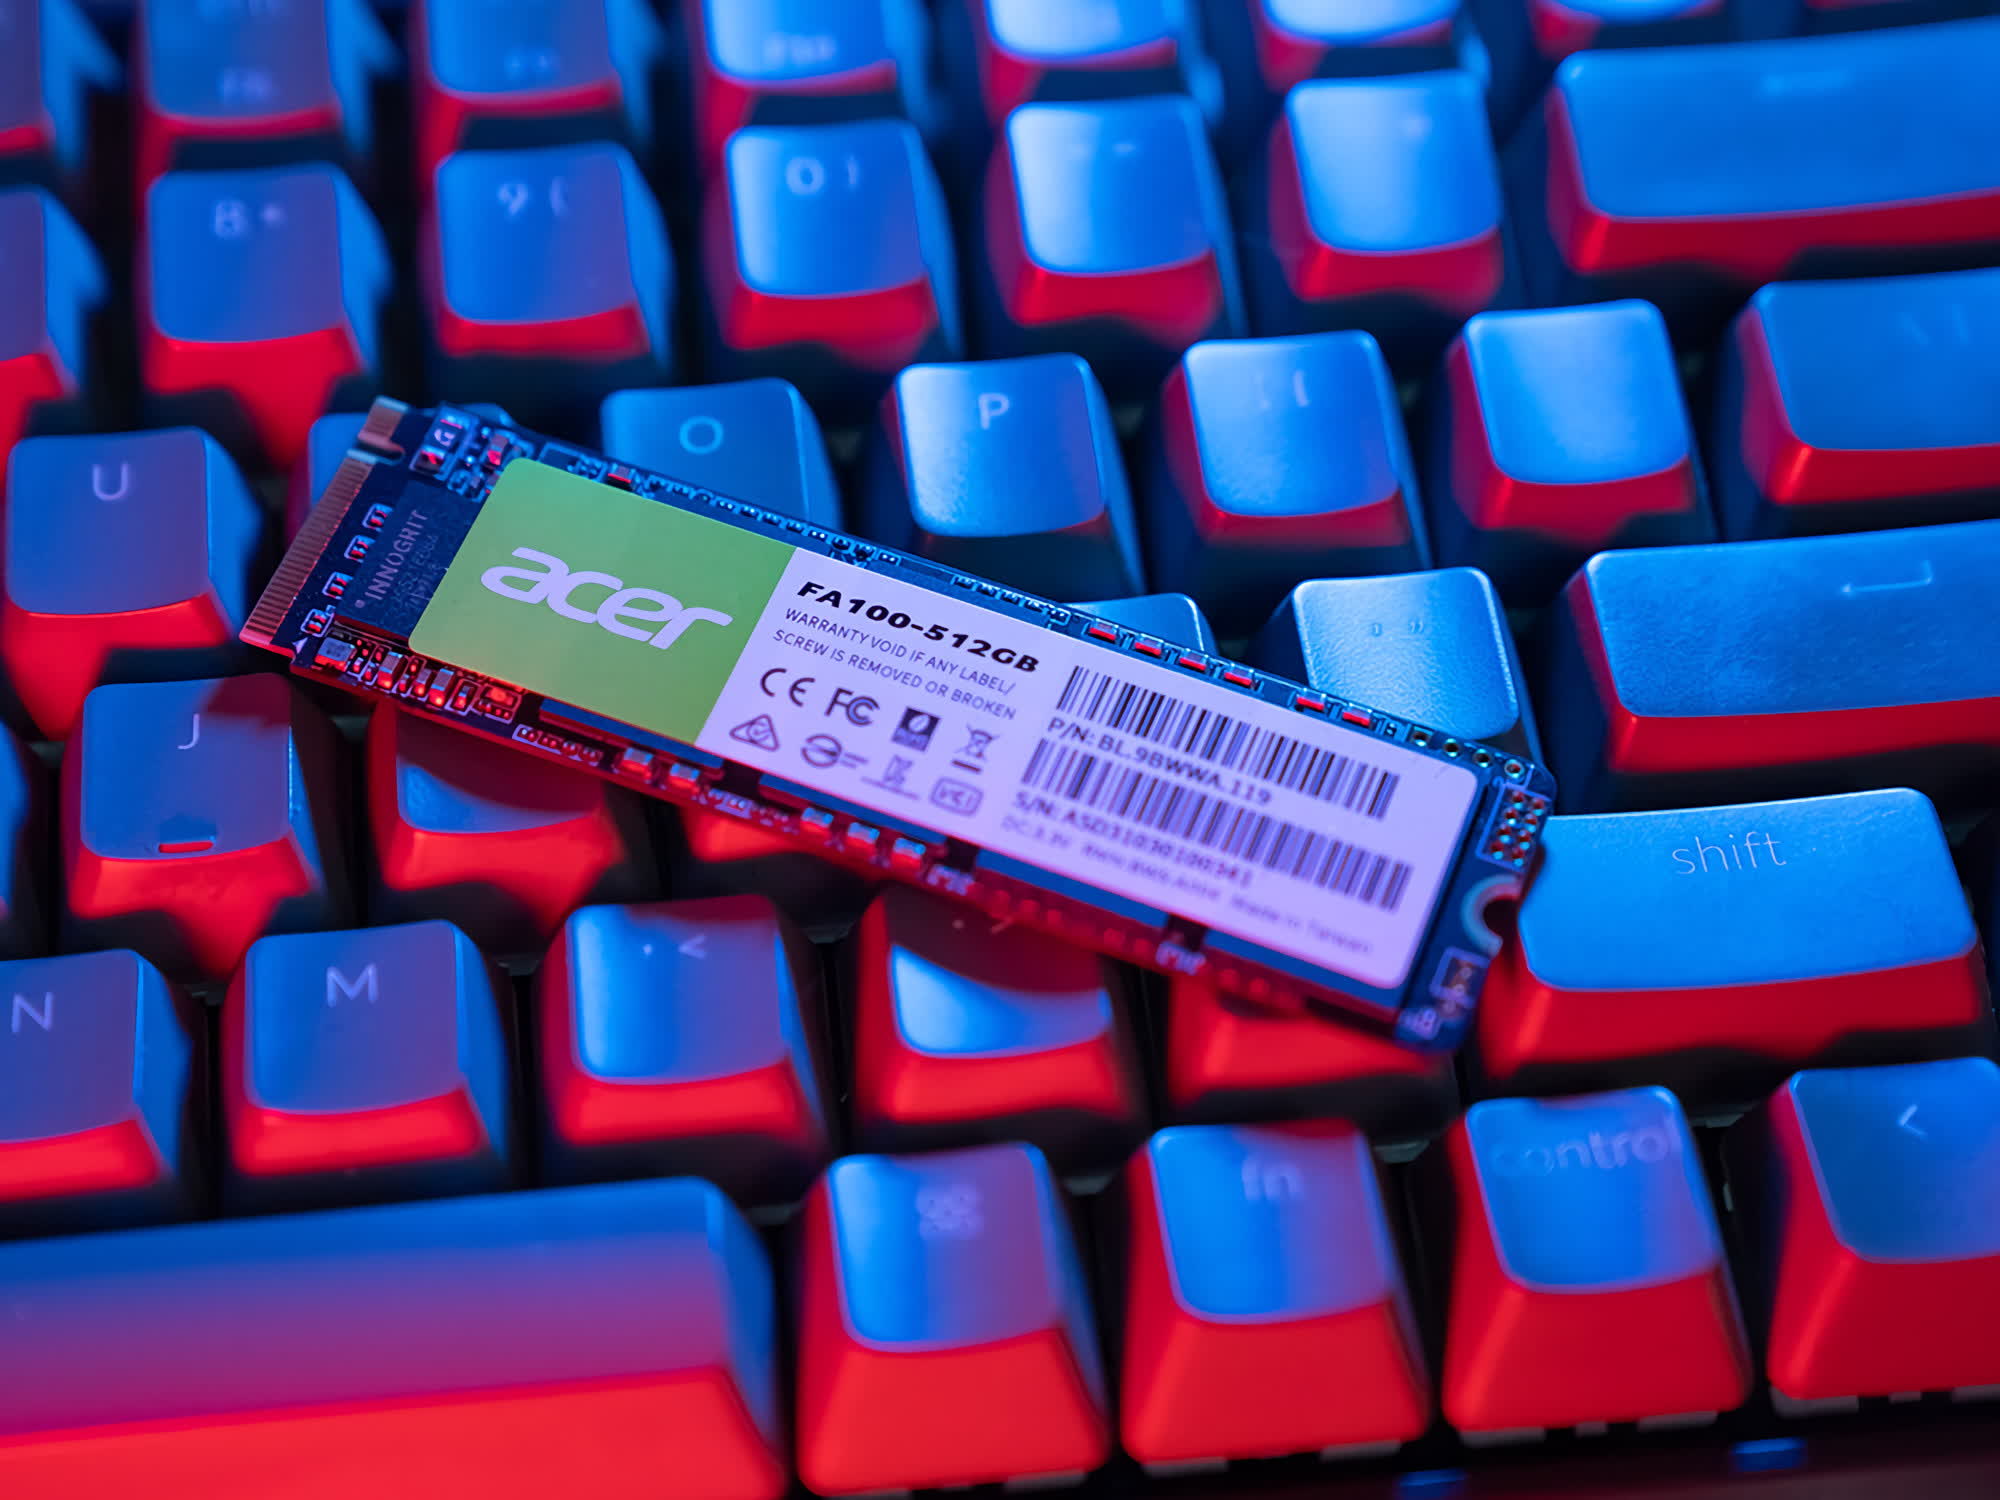 Acer will soon sell SSDs and RAM kits made by Chinese chipmaker Biwin